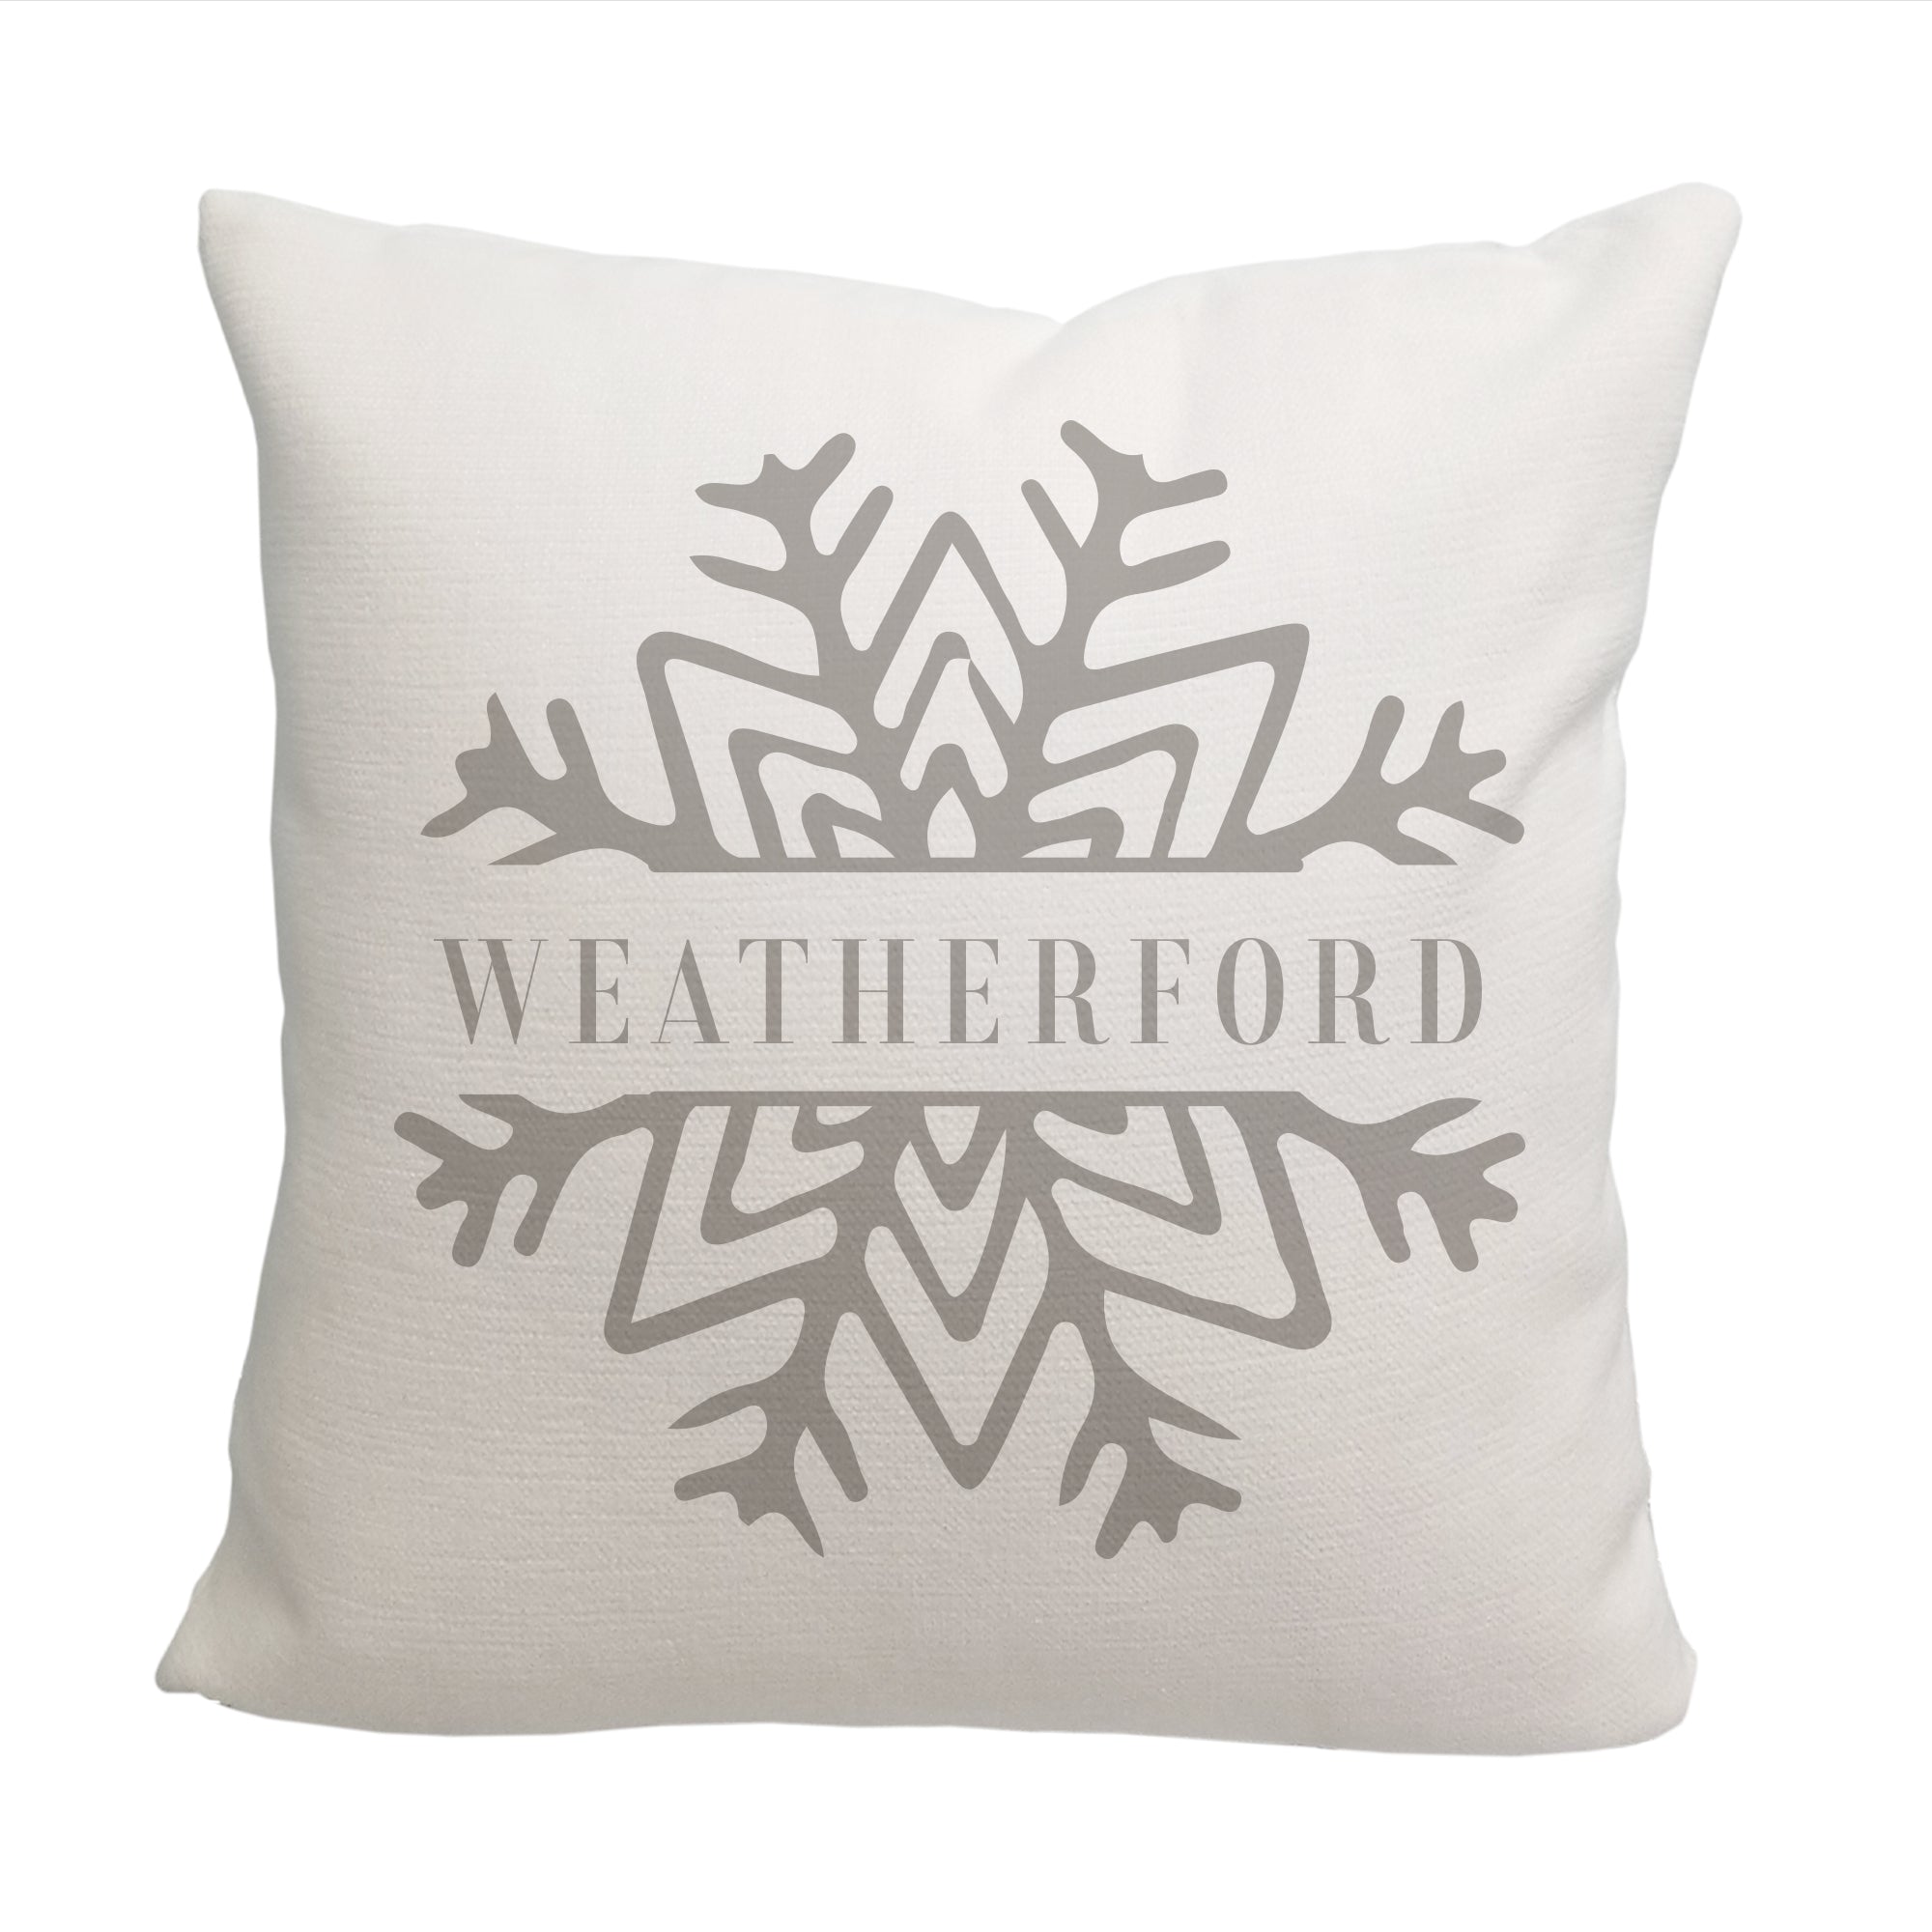 Personalized Snowflake Throw Pillow - Cover Only OR Cover with Insert